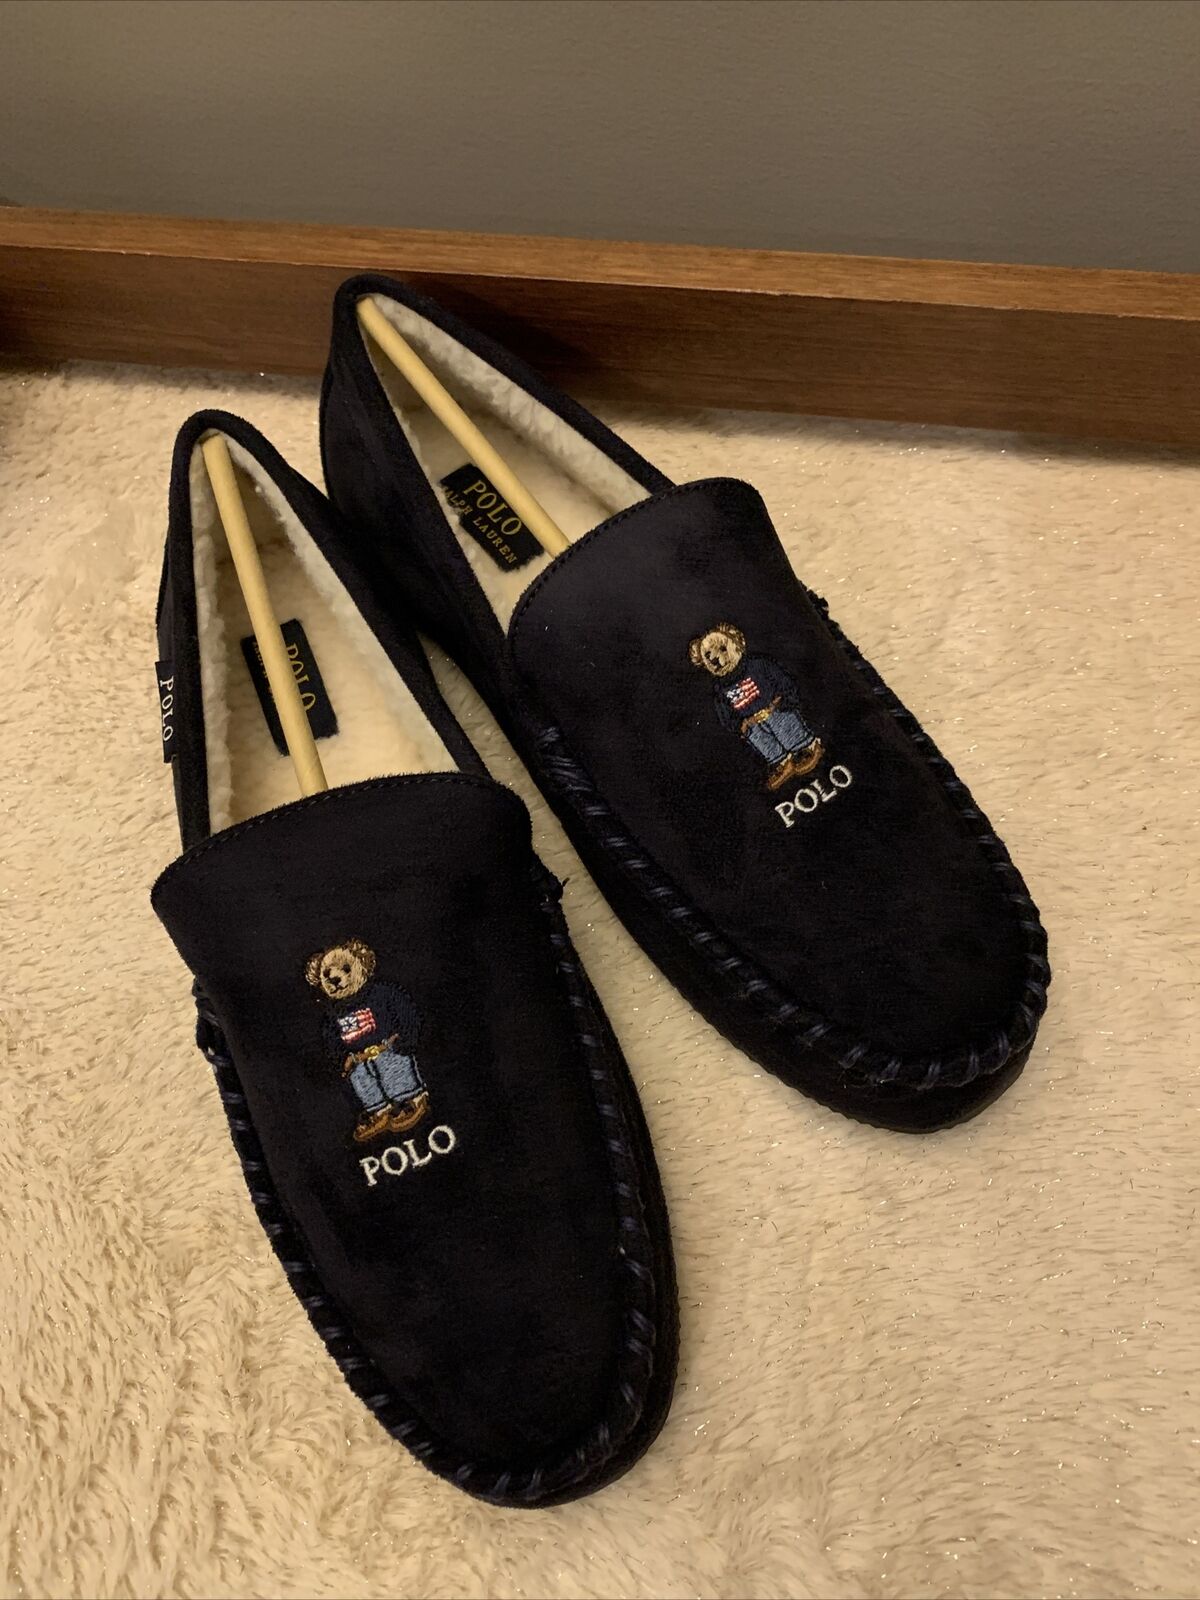 Polo Ralph Lauren slippers with american bear in tan | ASOS